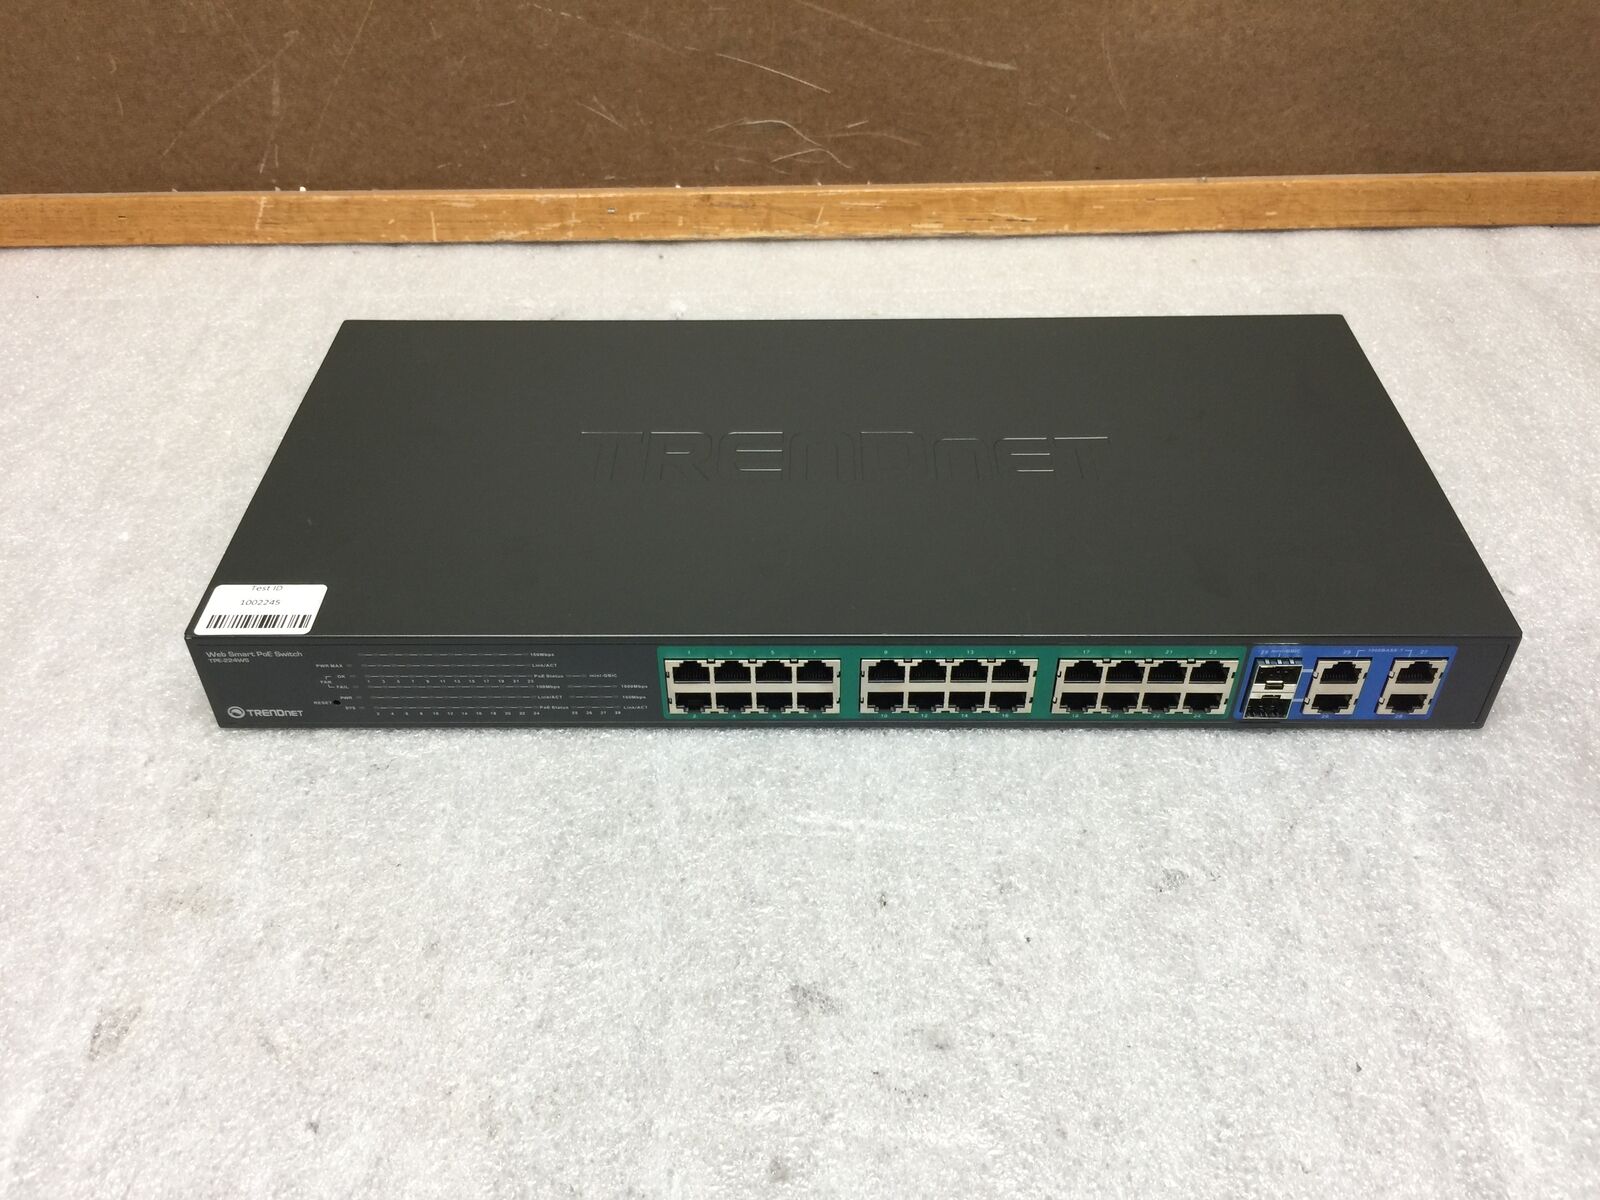 TrendNet TPE-224WS 24-Port 10/100 PoE Managed Switch, Tested/Working/Reset